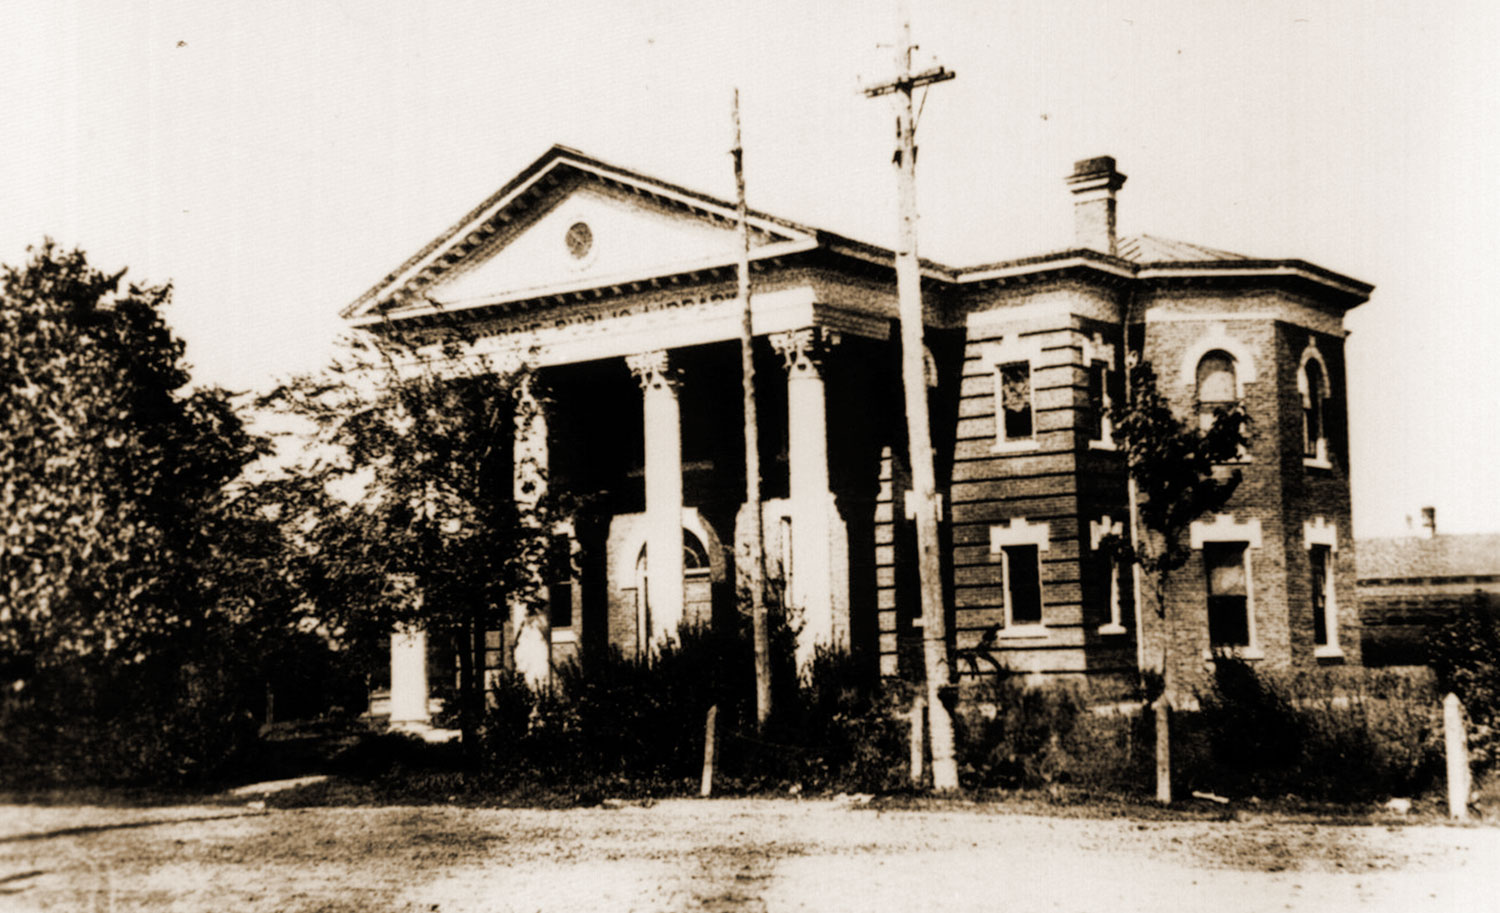 History of the Carnegie Public Library in Downtown Bryan